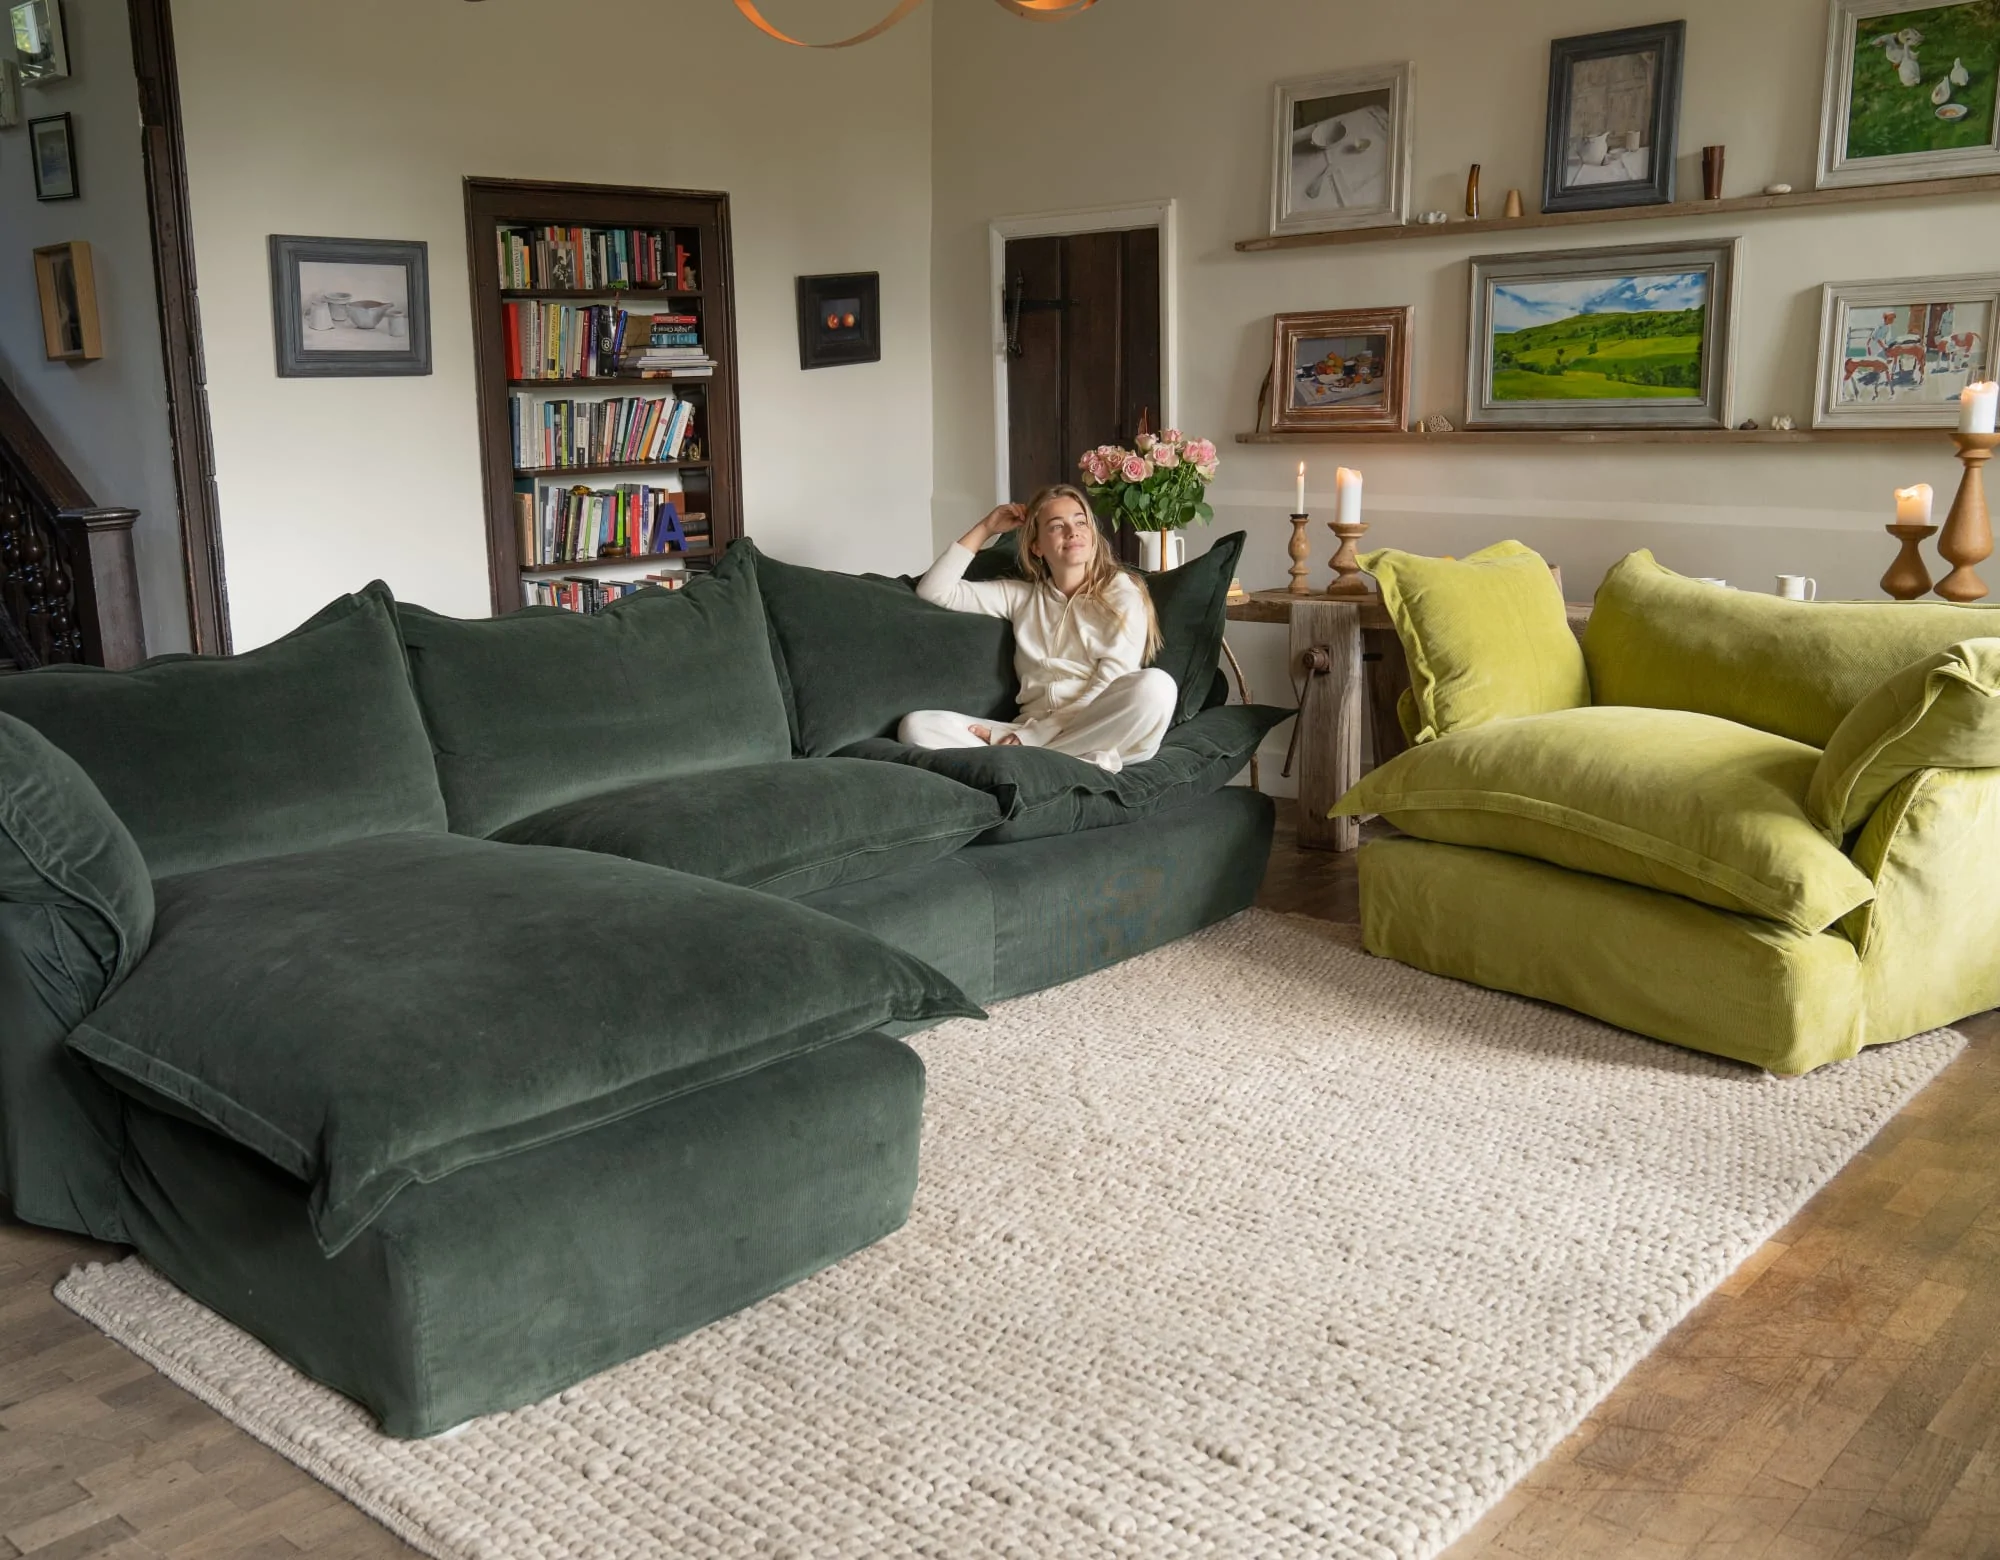 Marnie on a Pine green corduroy, Song pillow edge large Sofa Chaise in a living room setting.